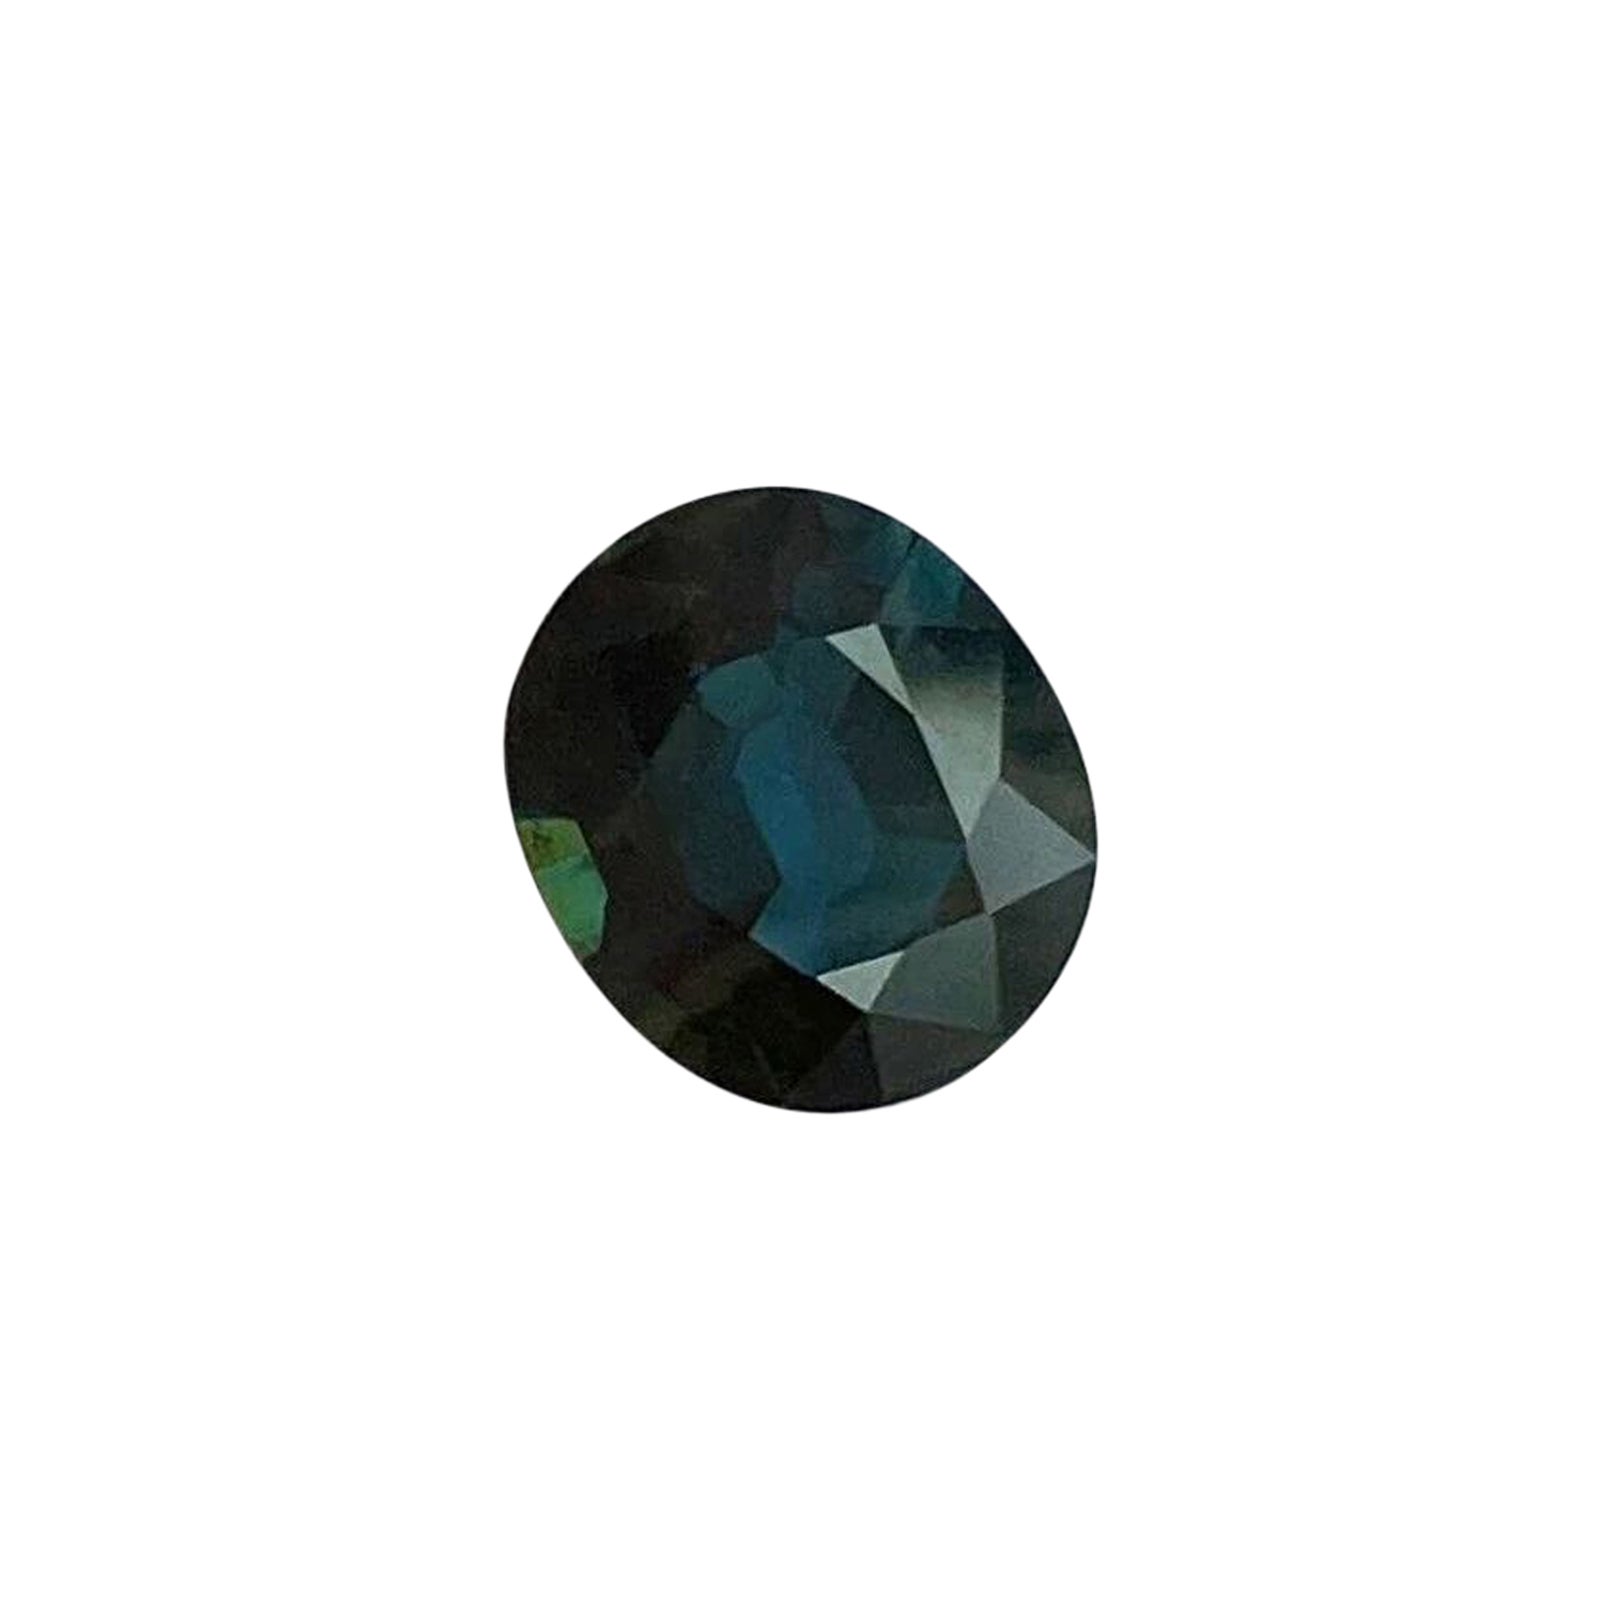 1.35ct Deep Blue Sapphire Rare Oval Cut IGI Certified Loose Gemstone in Blister For Sale